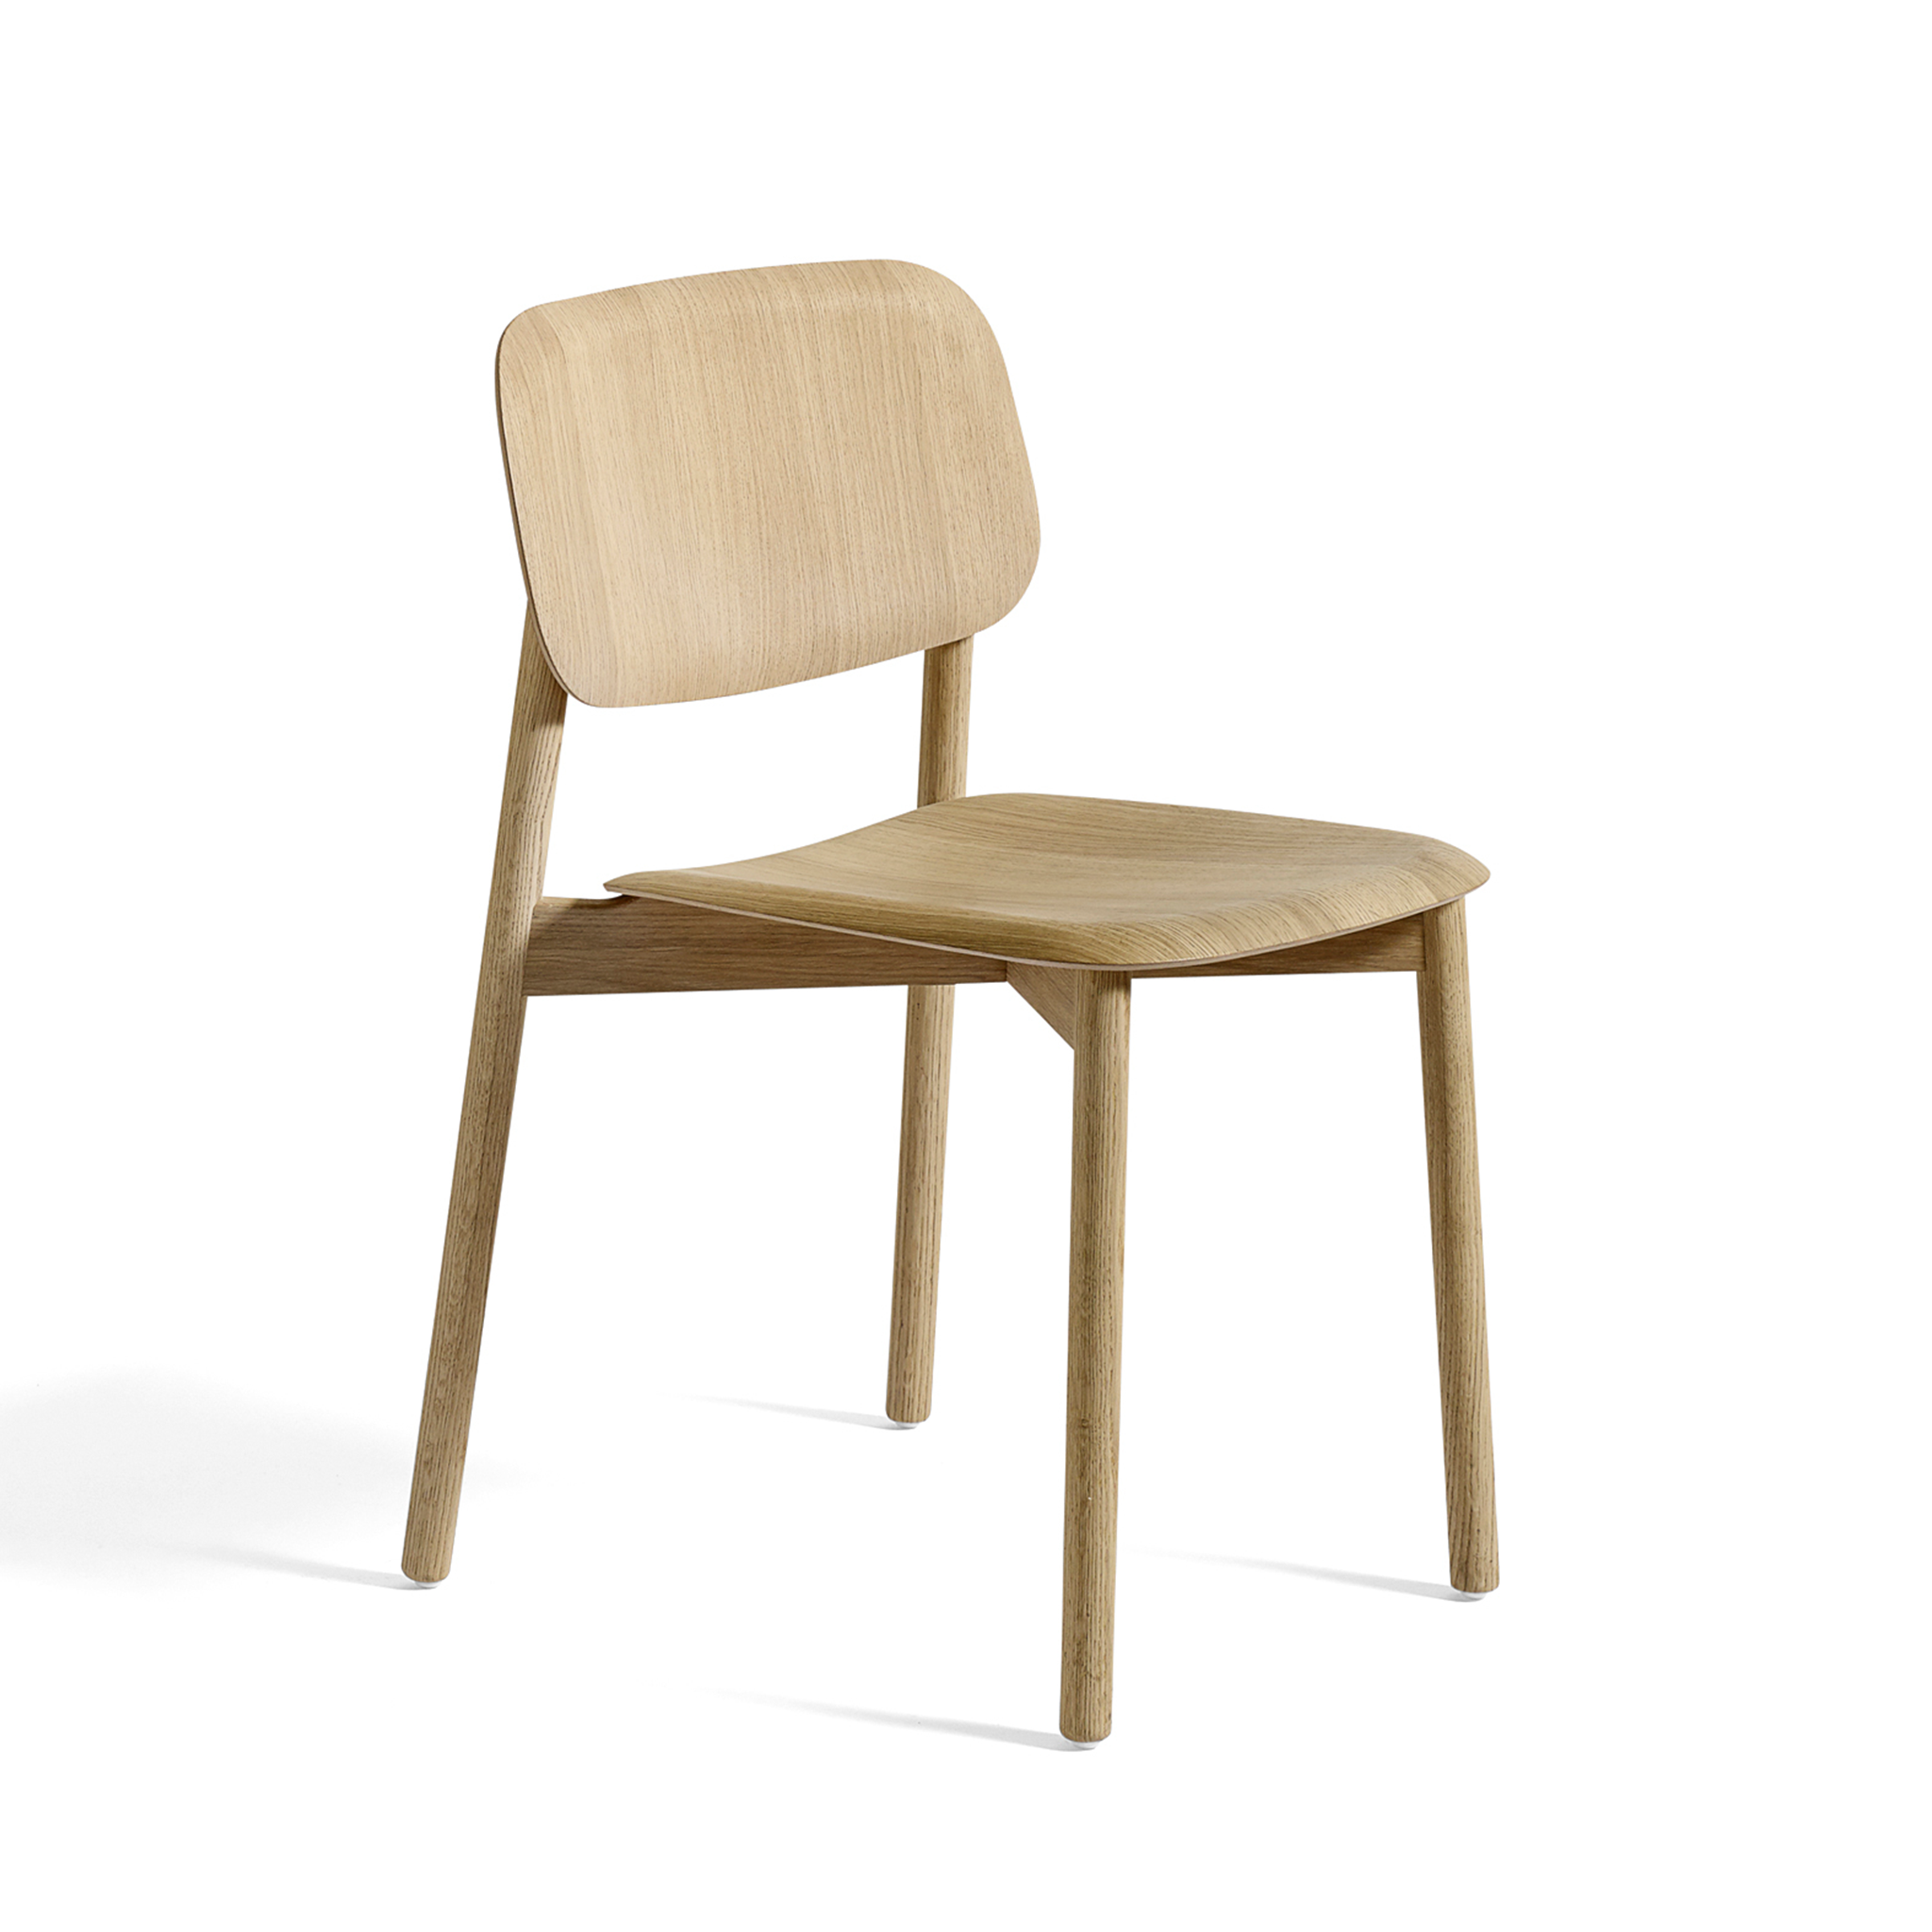 Soft Edge 60 Chair by Hay